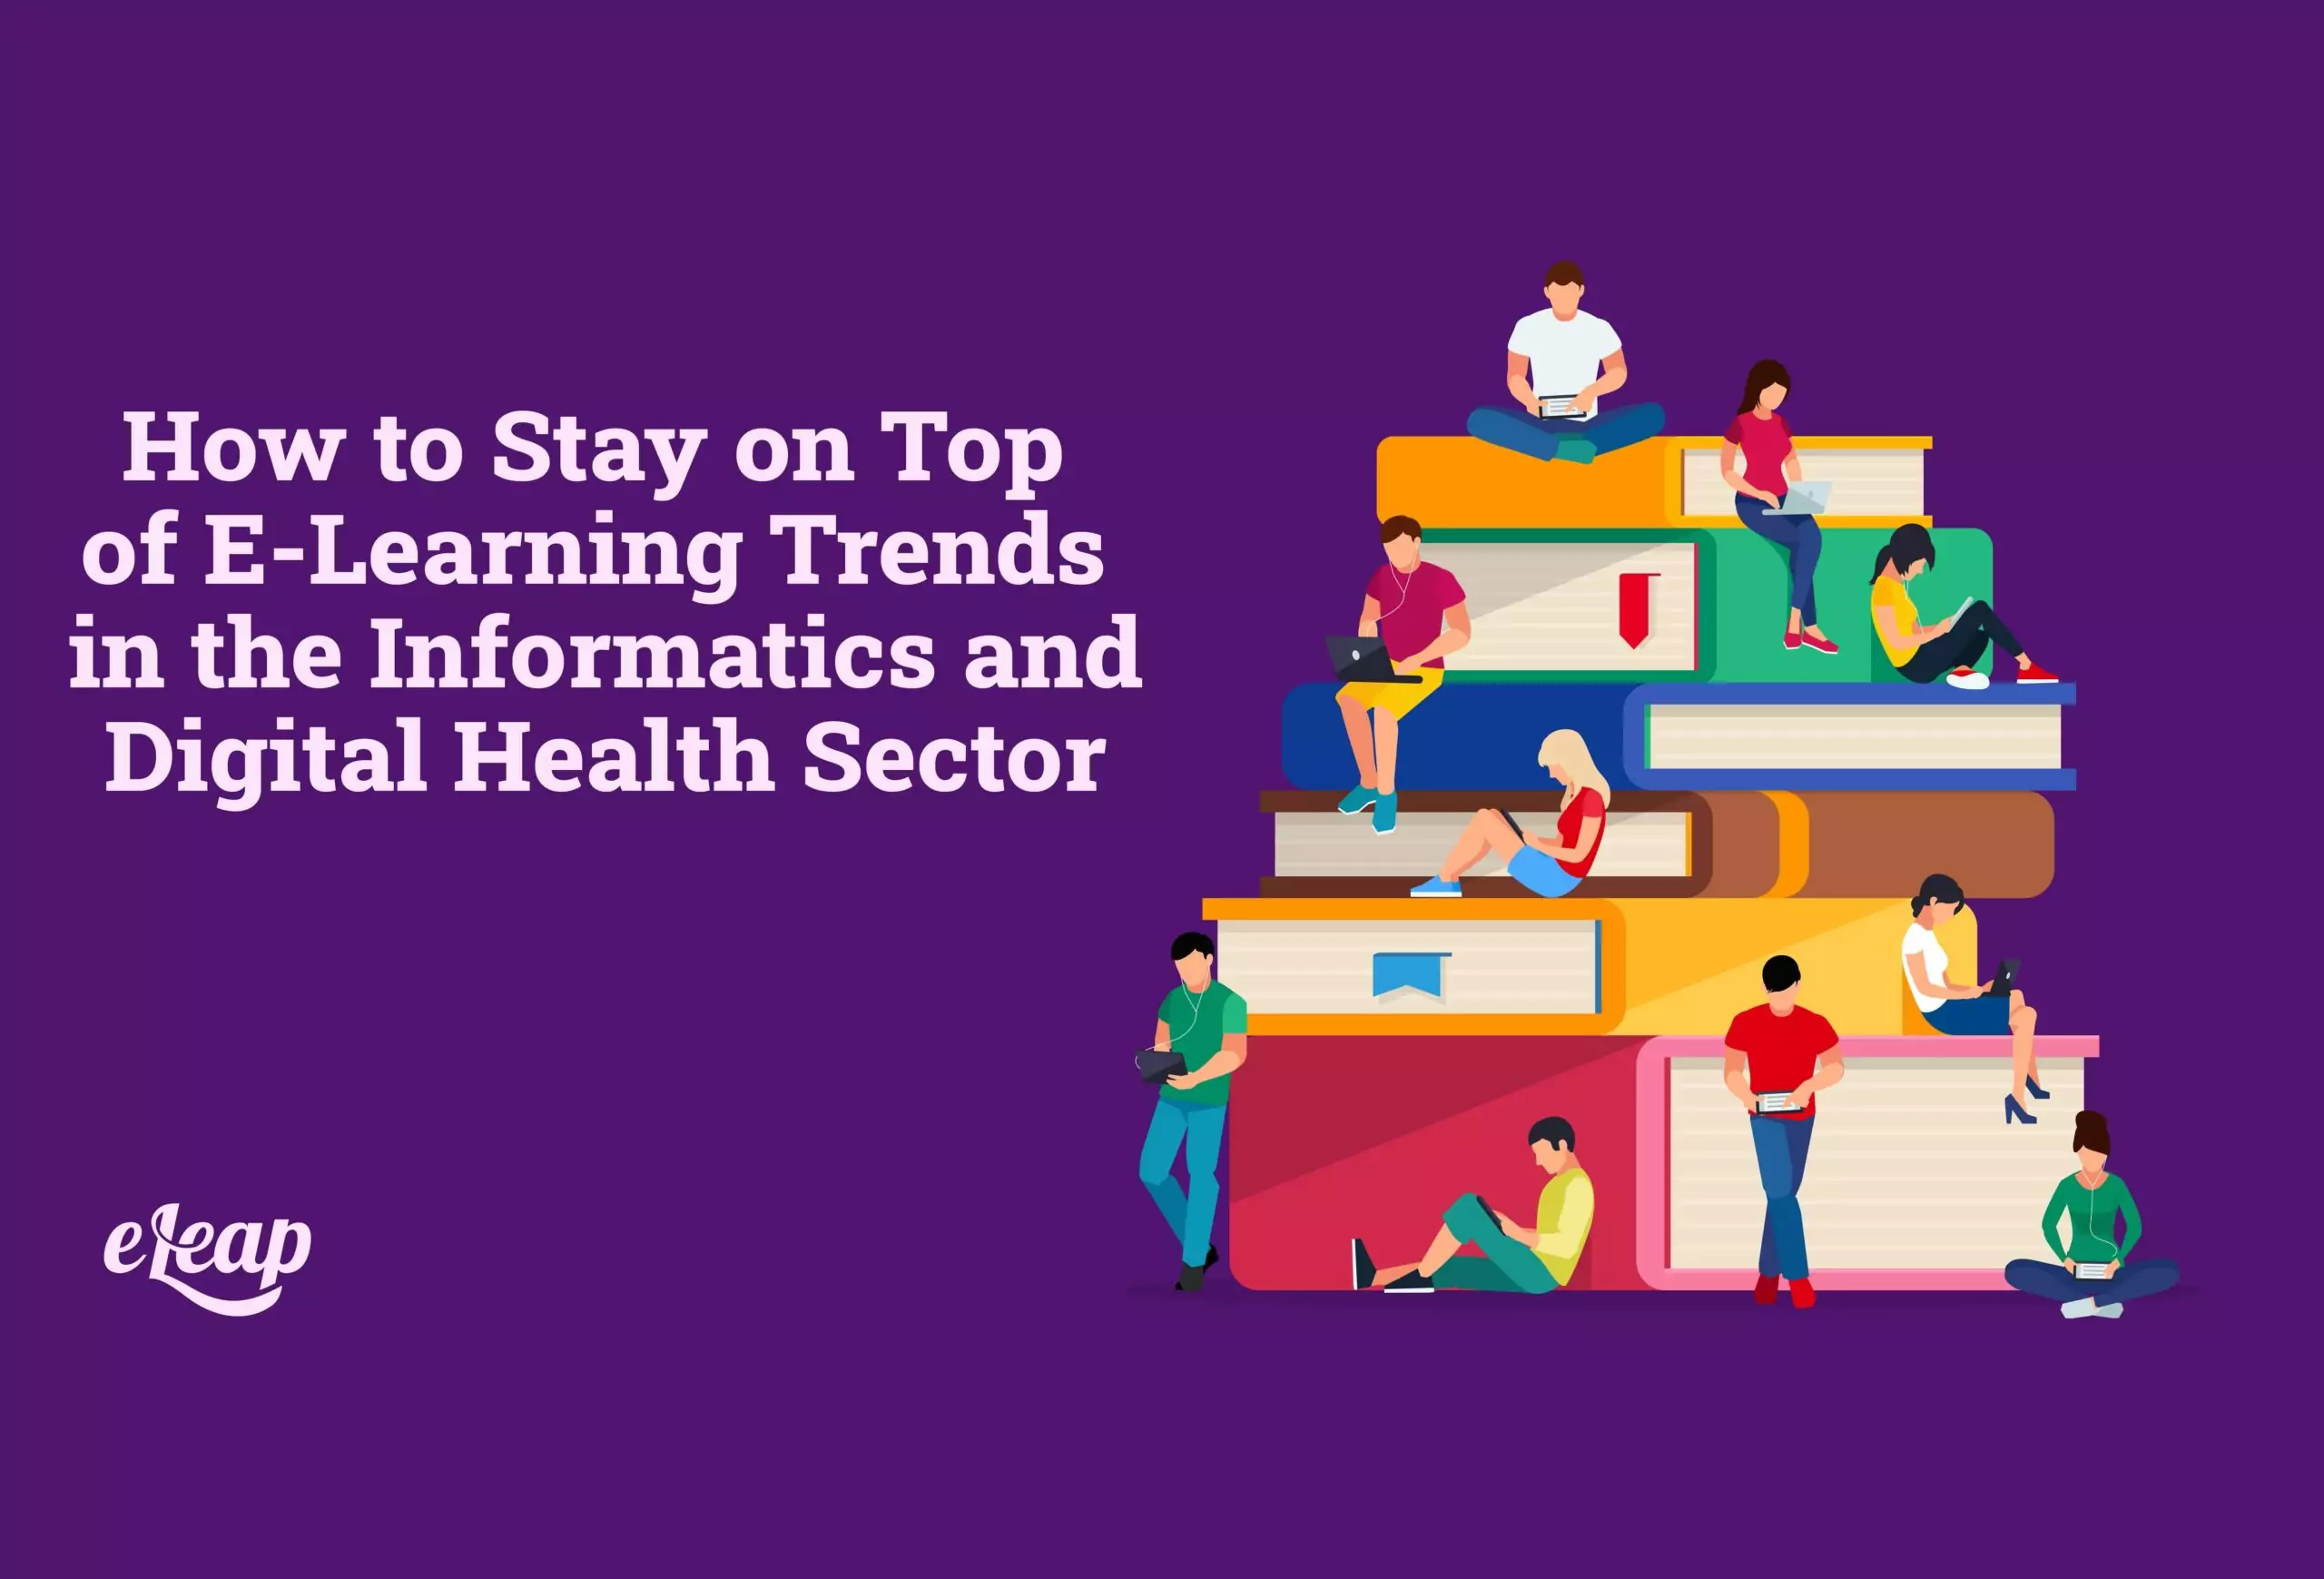 How to Stay on Top of E-Learning Trends in the Informatics and Digital Health Sector